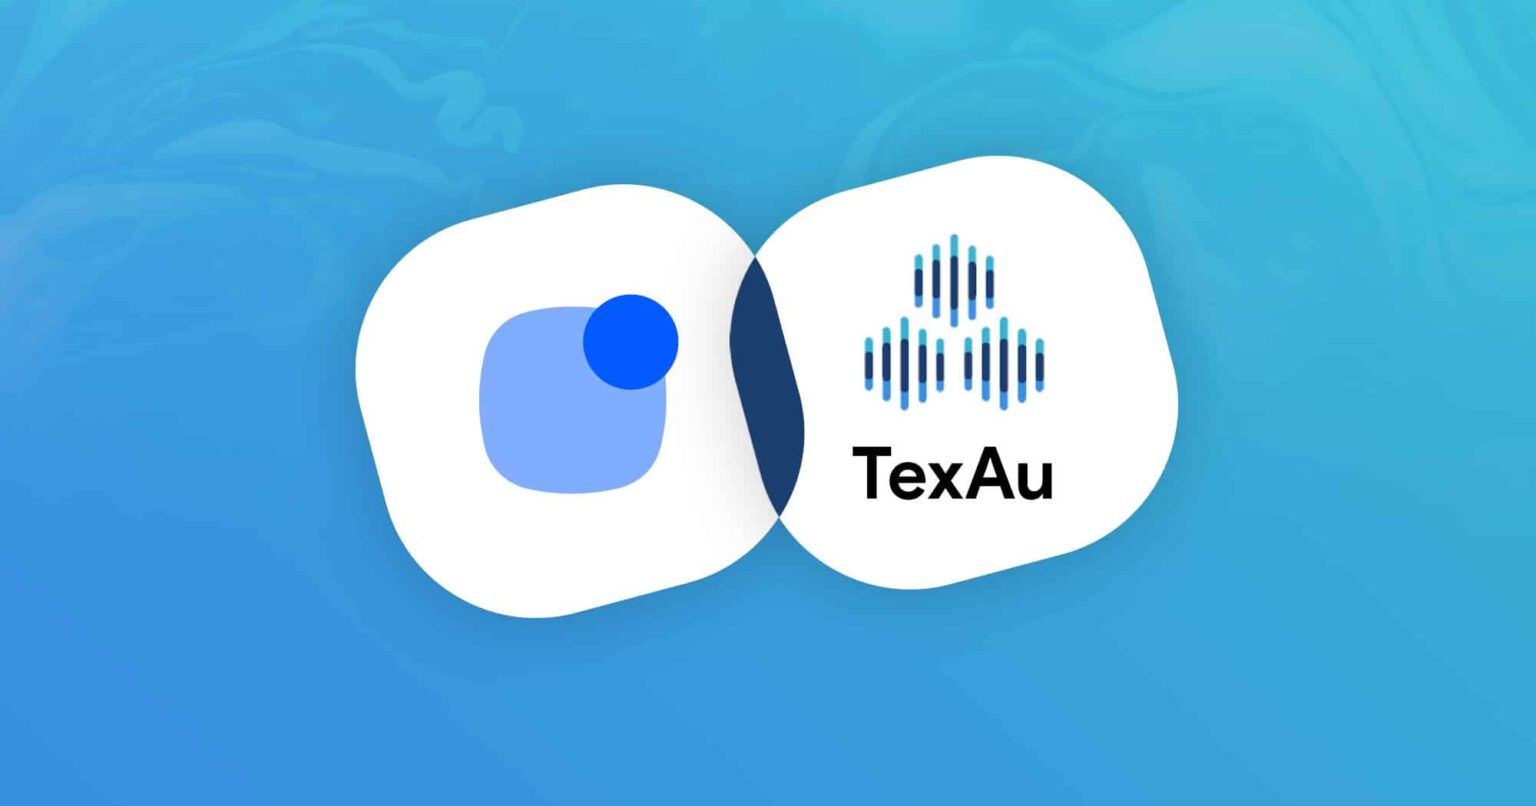 Introducing Reply and TexAu integration